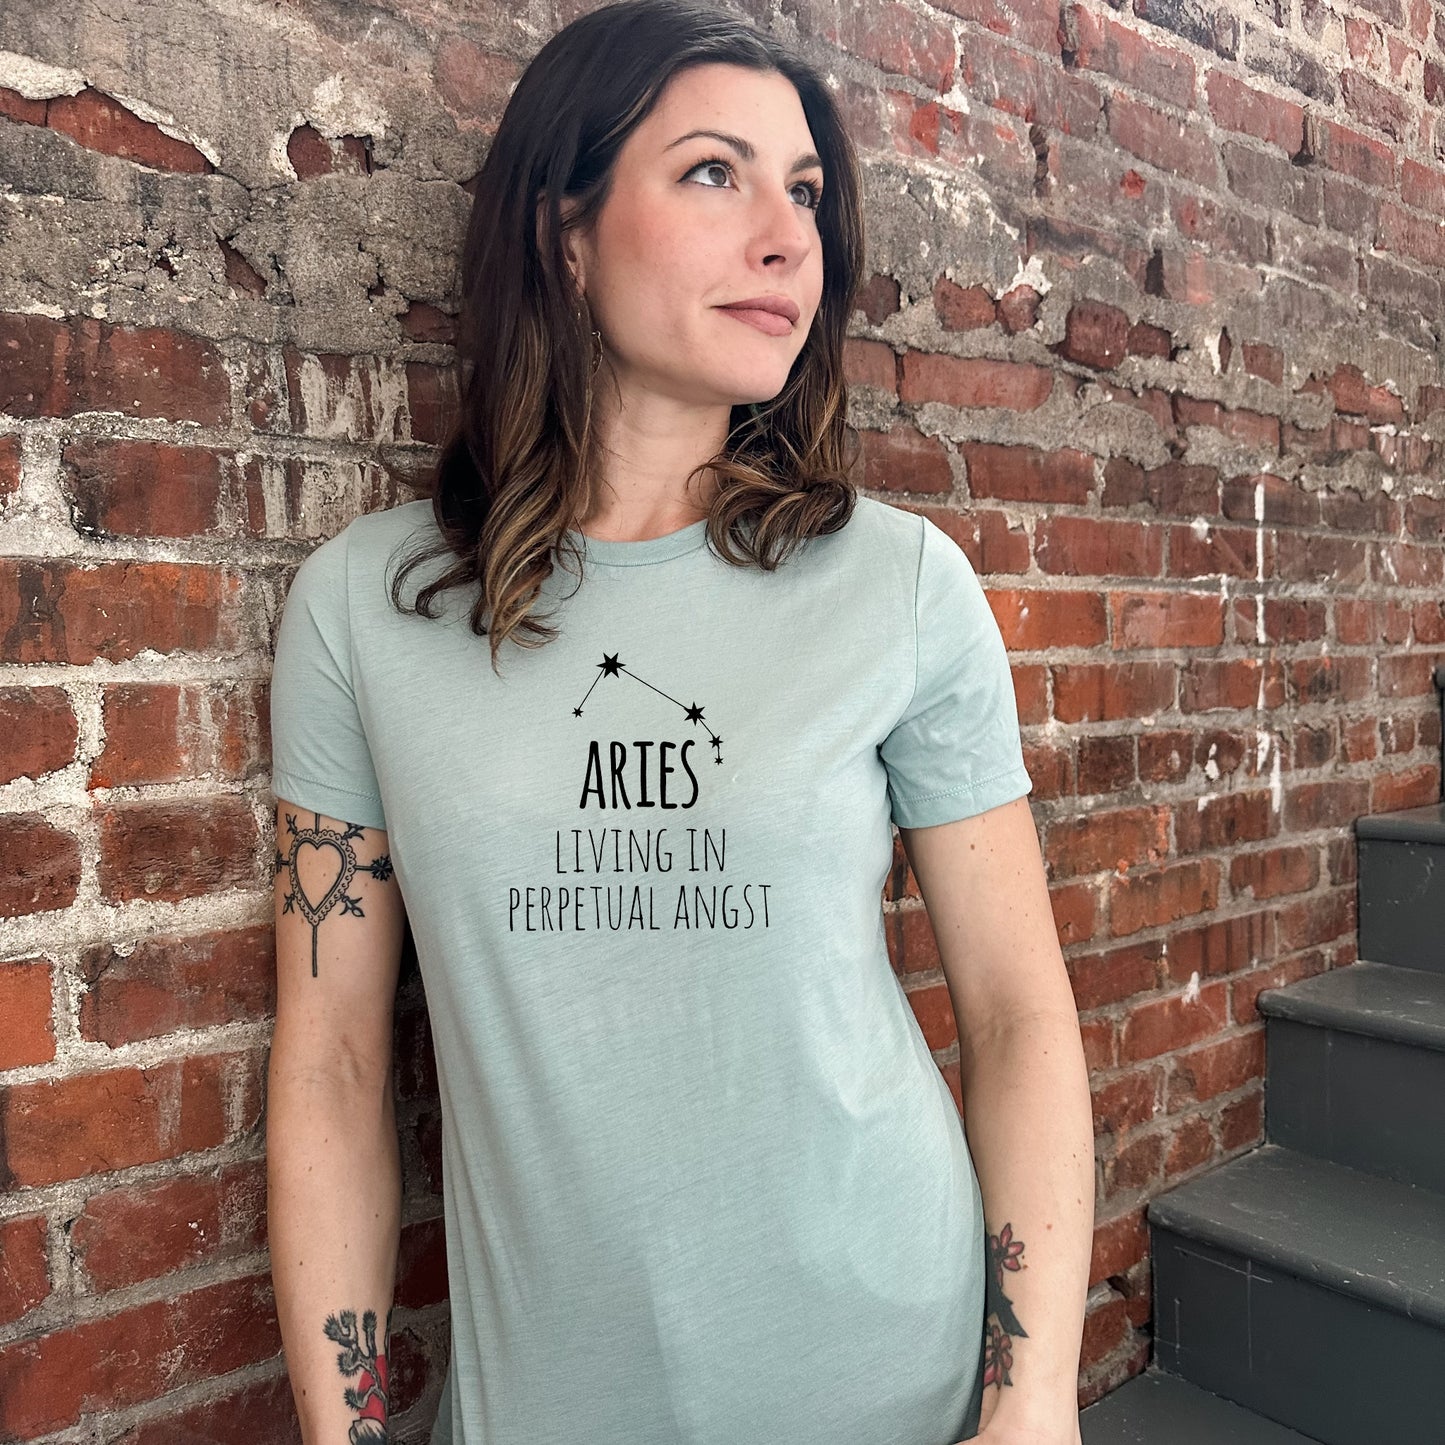 Aries - Women's Crew Tee - Olive or Dusty Blue